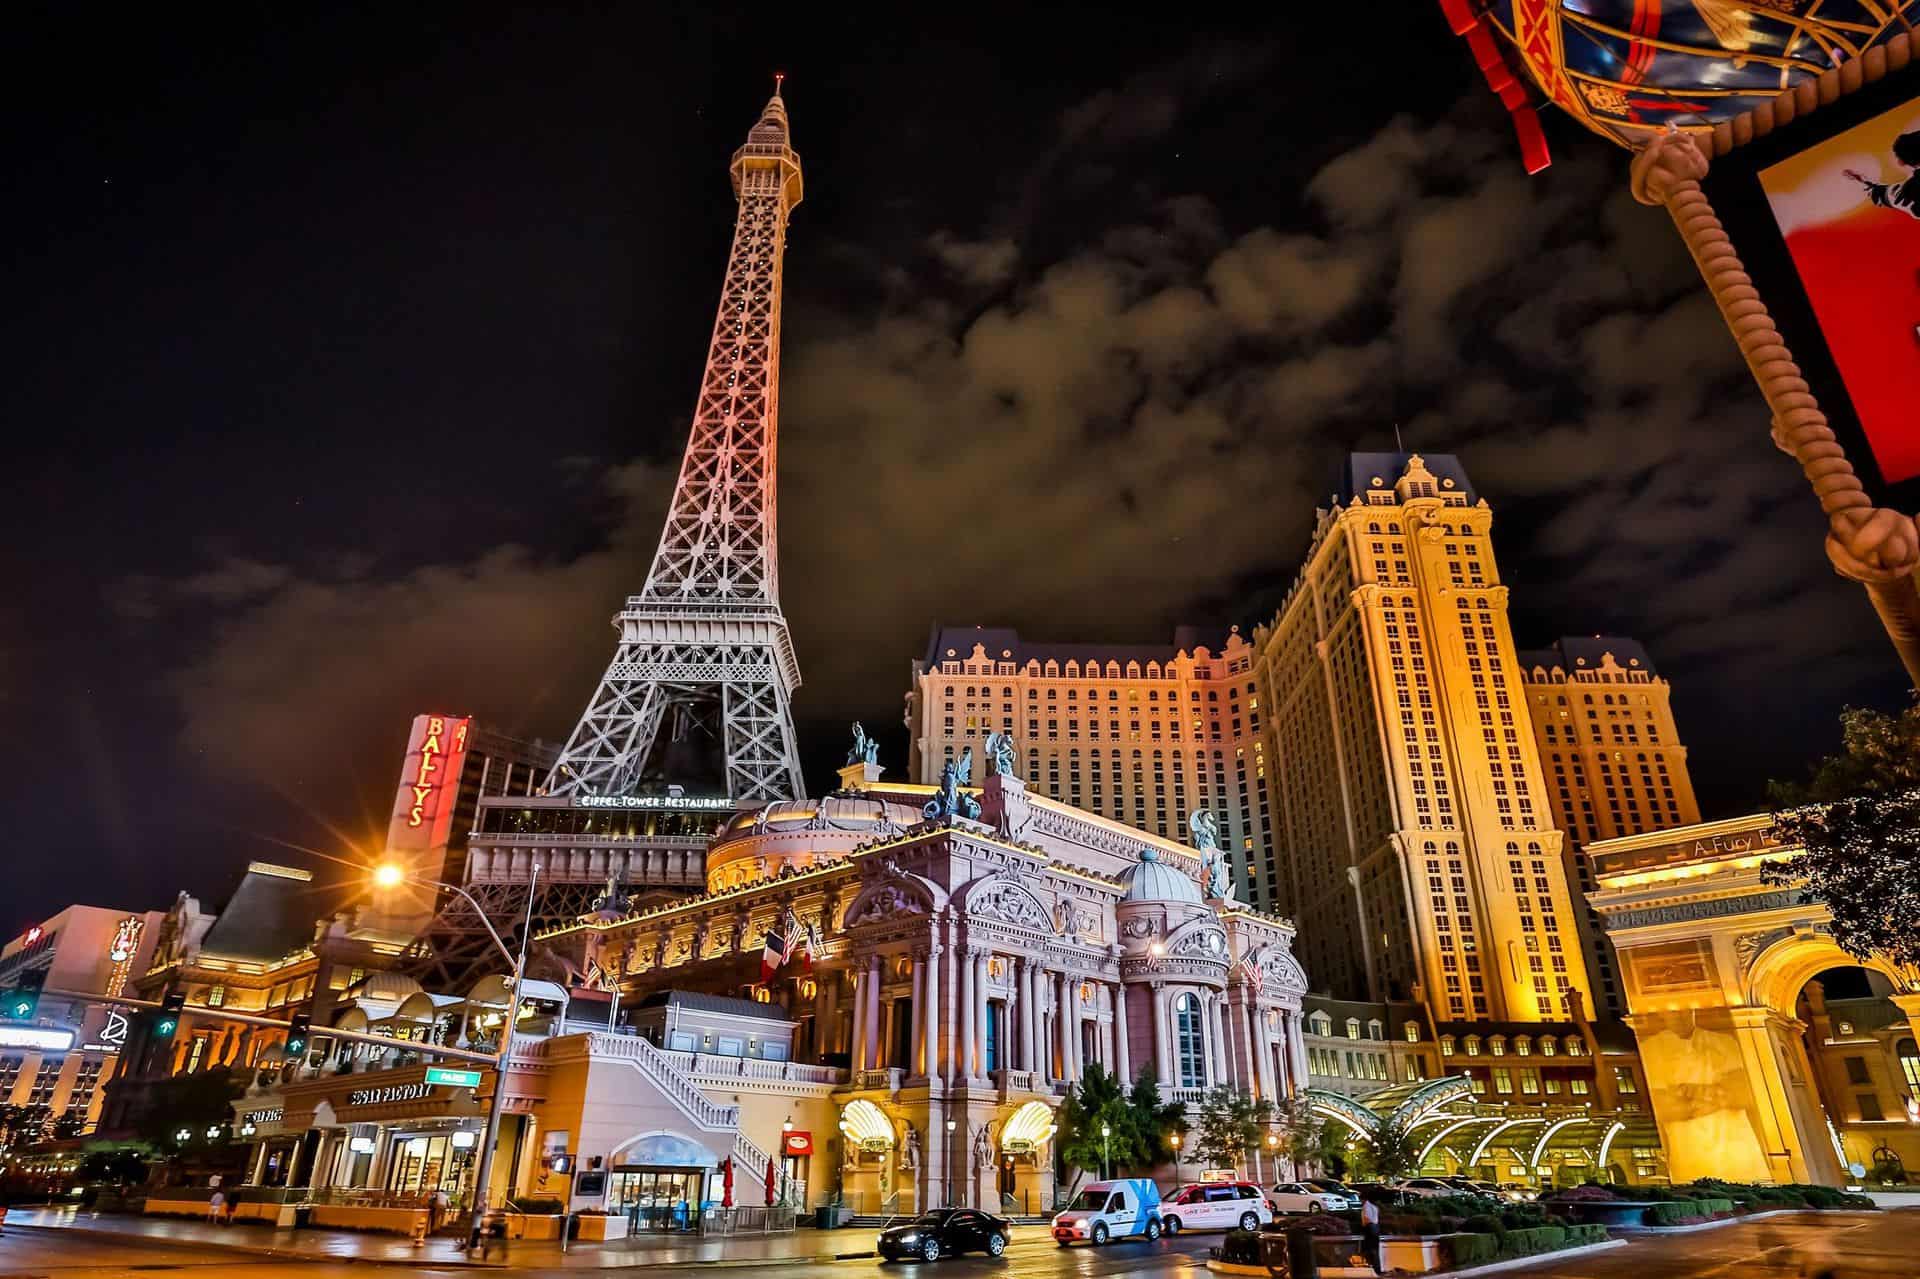 Las Vegas Sightseeing Tours - Guided Strip, City & Attractions Tour Prices